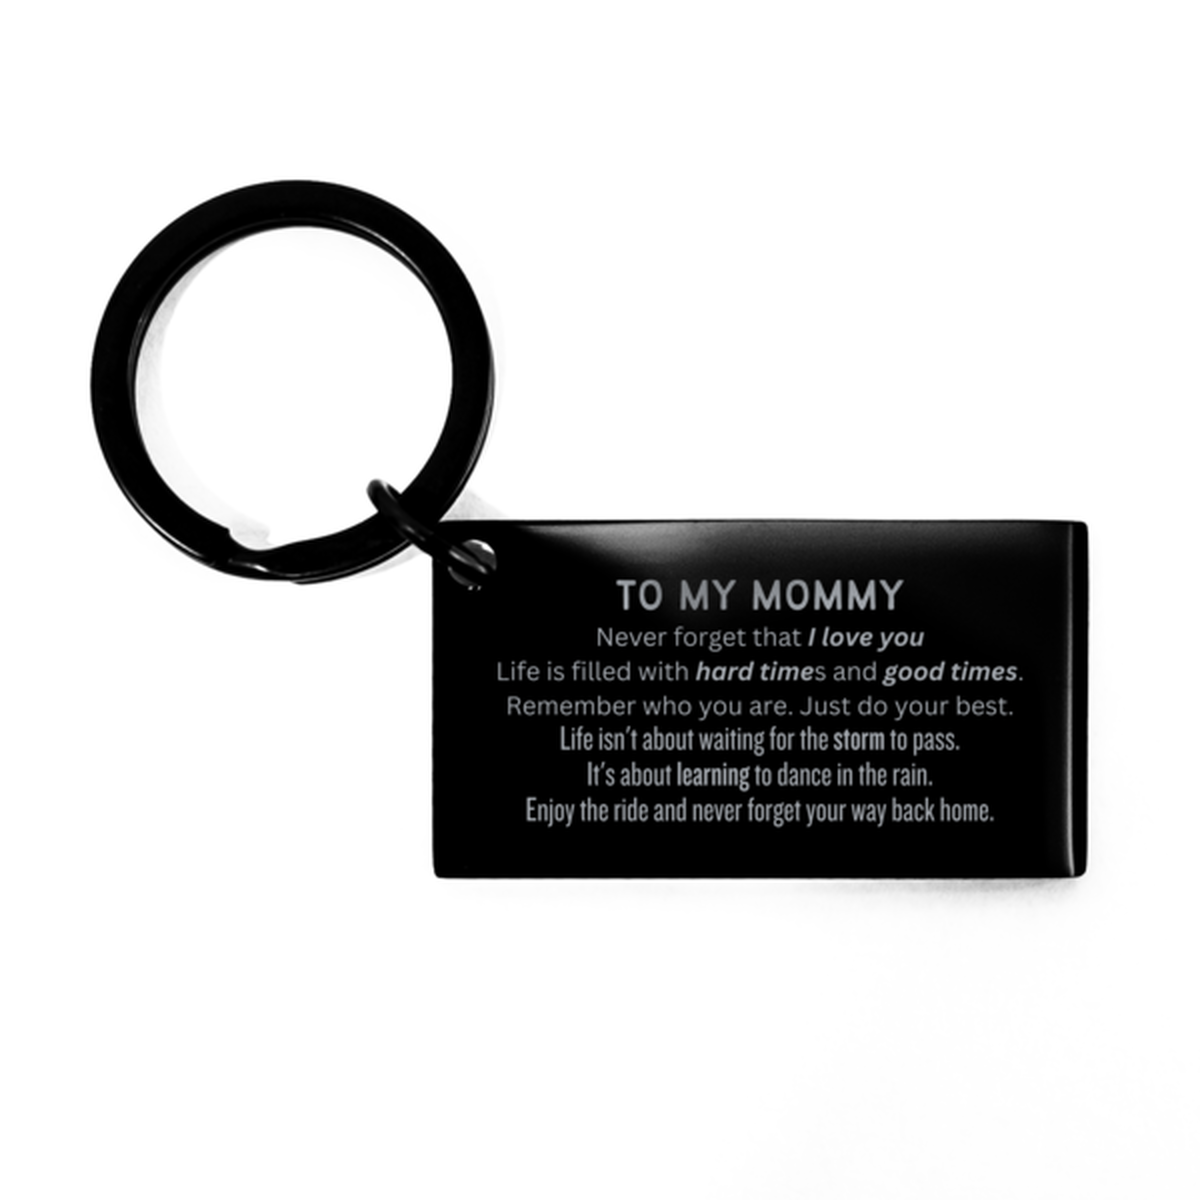 Christmas Mommy Keychain Gifts, To My Mommy Birthday Thank You Gifts For Mommy, Graduation Unique Gifts For Mommy To My Mommy Never forget that I love you life is filled with hard times and good times. Remember who you are. Just do your best